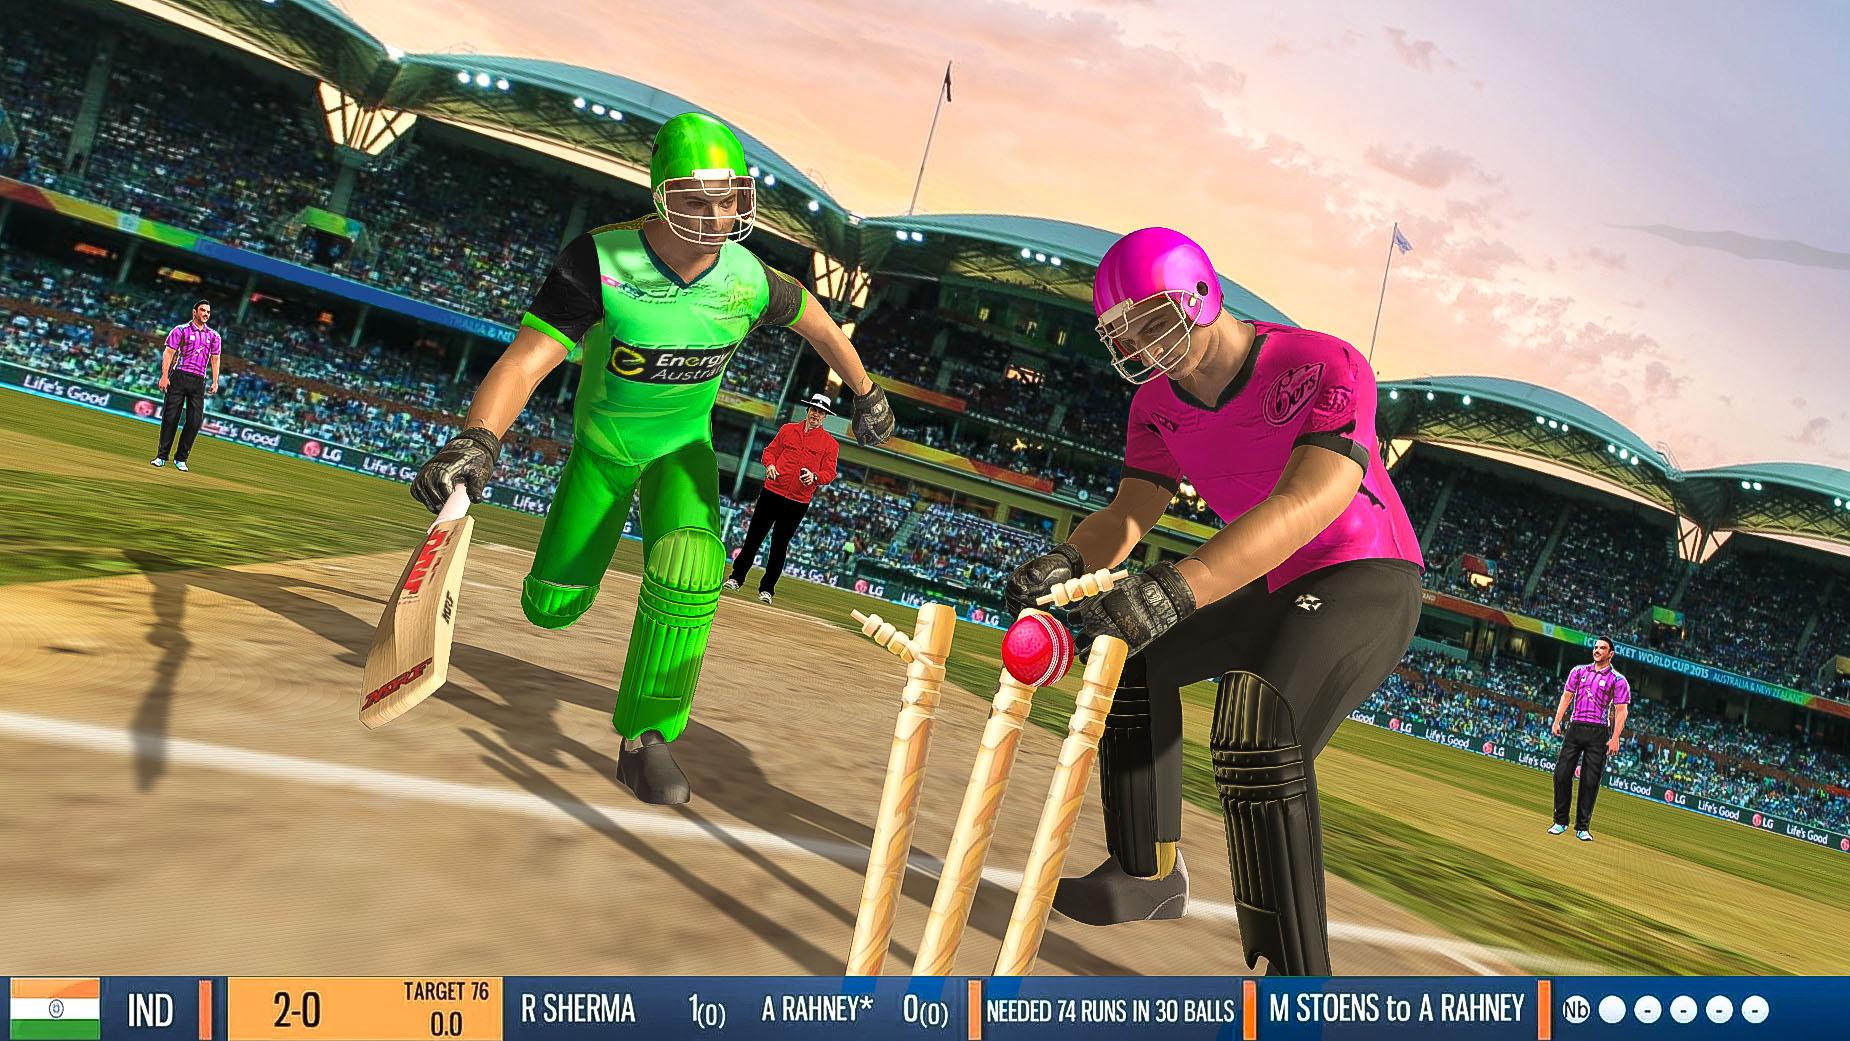 Play With Friends-Real Cricket Craze 1.1 Screenshot 4